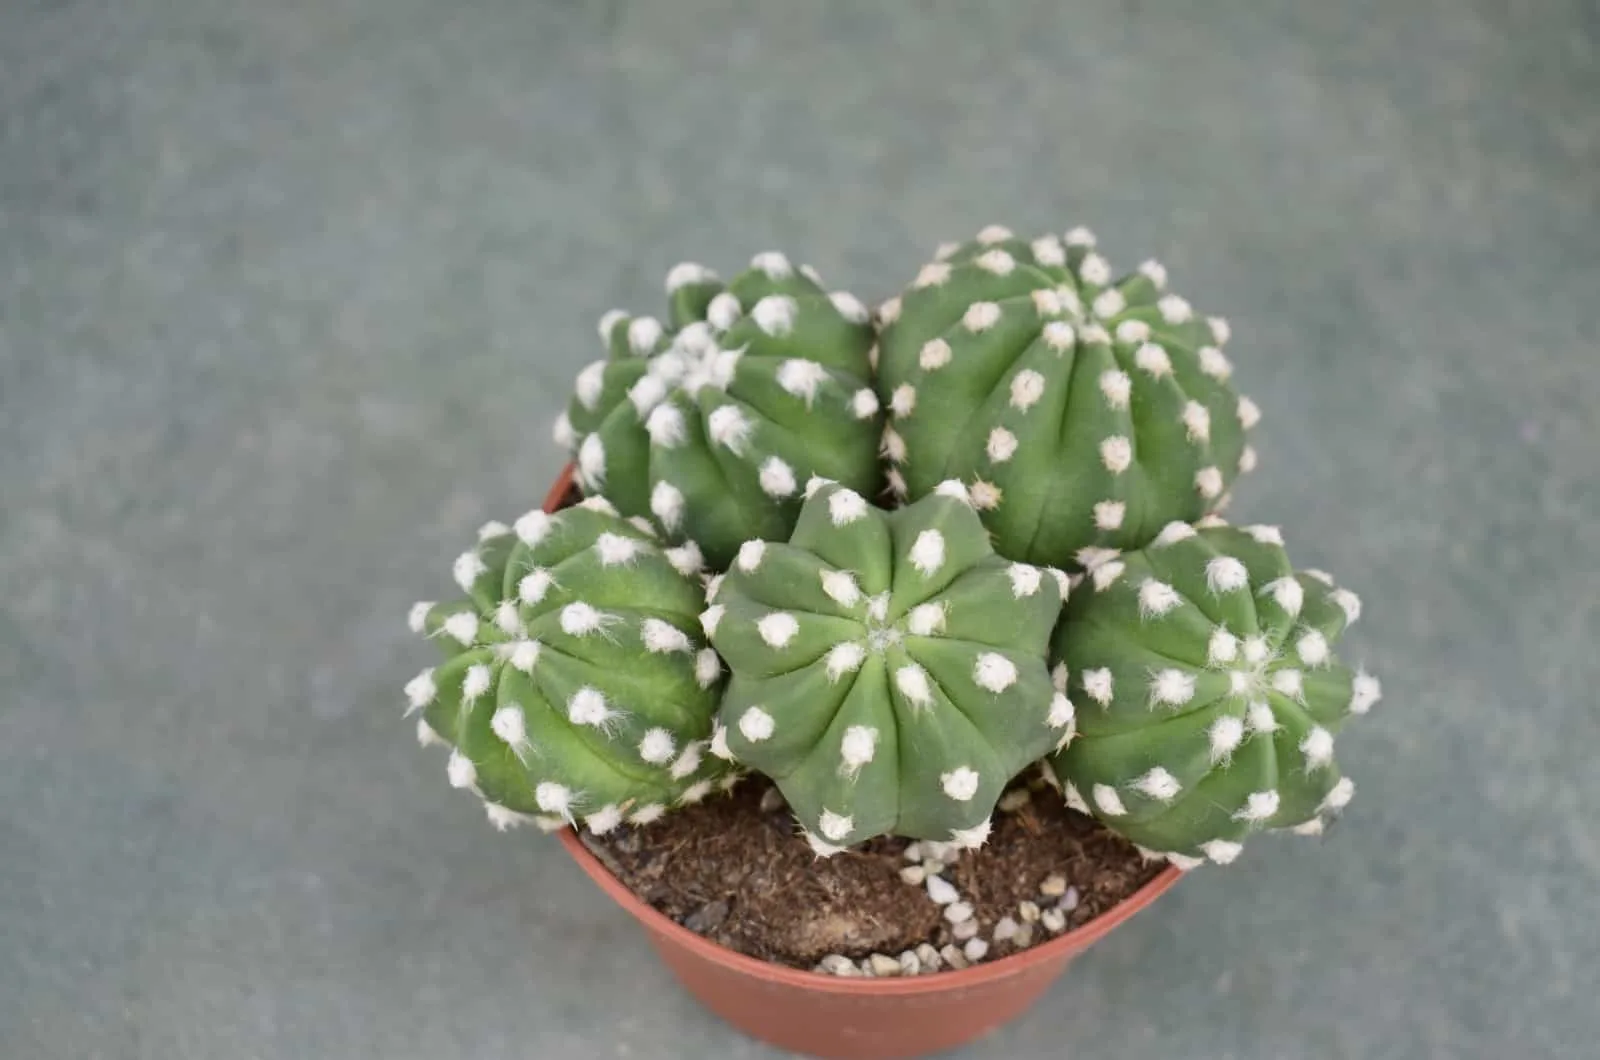 Domino Cactus sitting on table